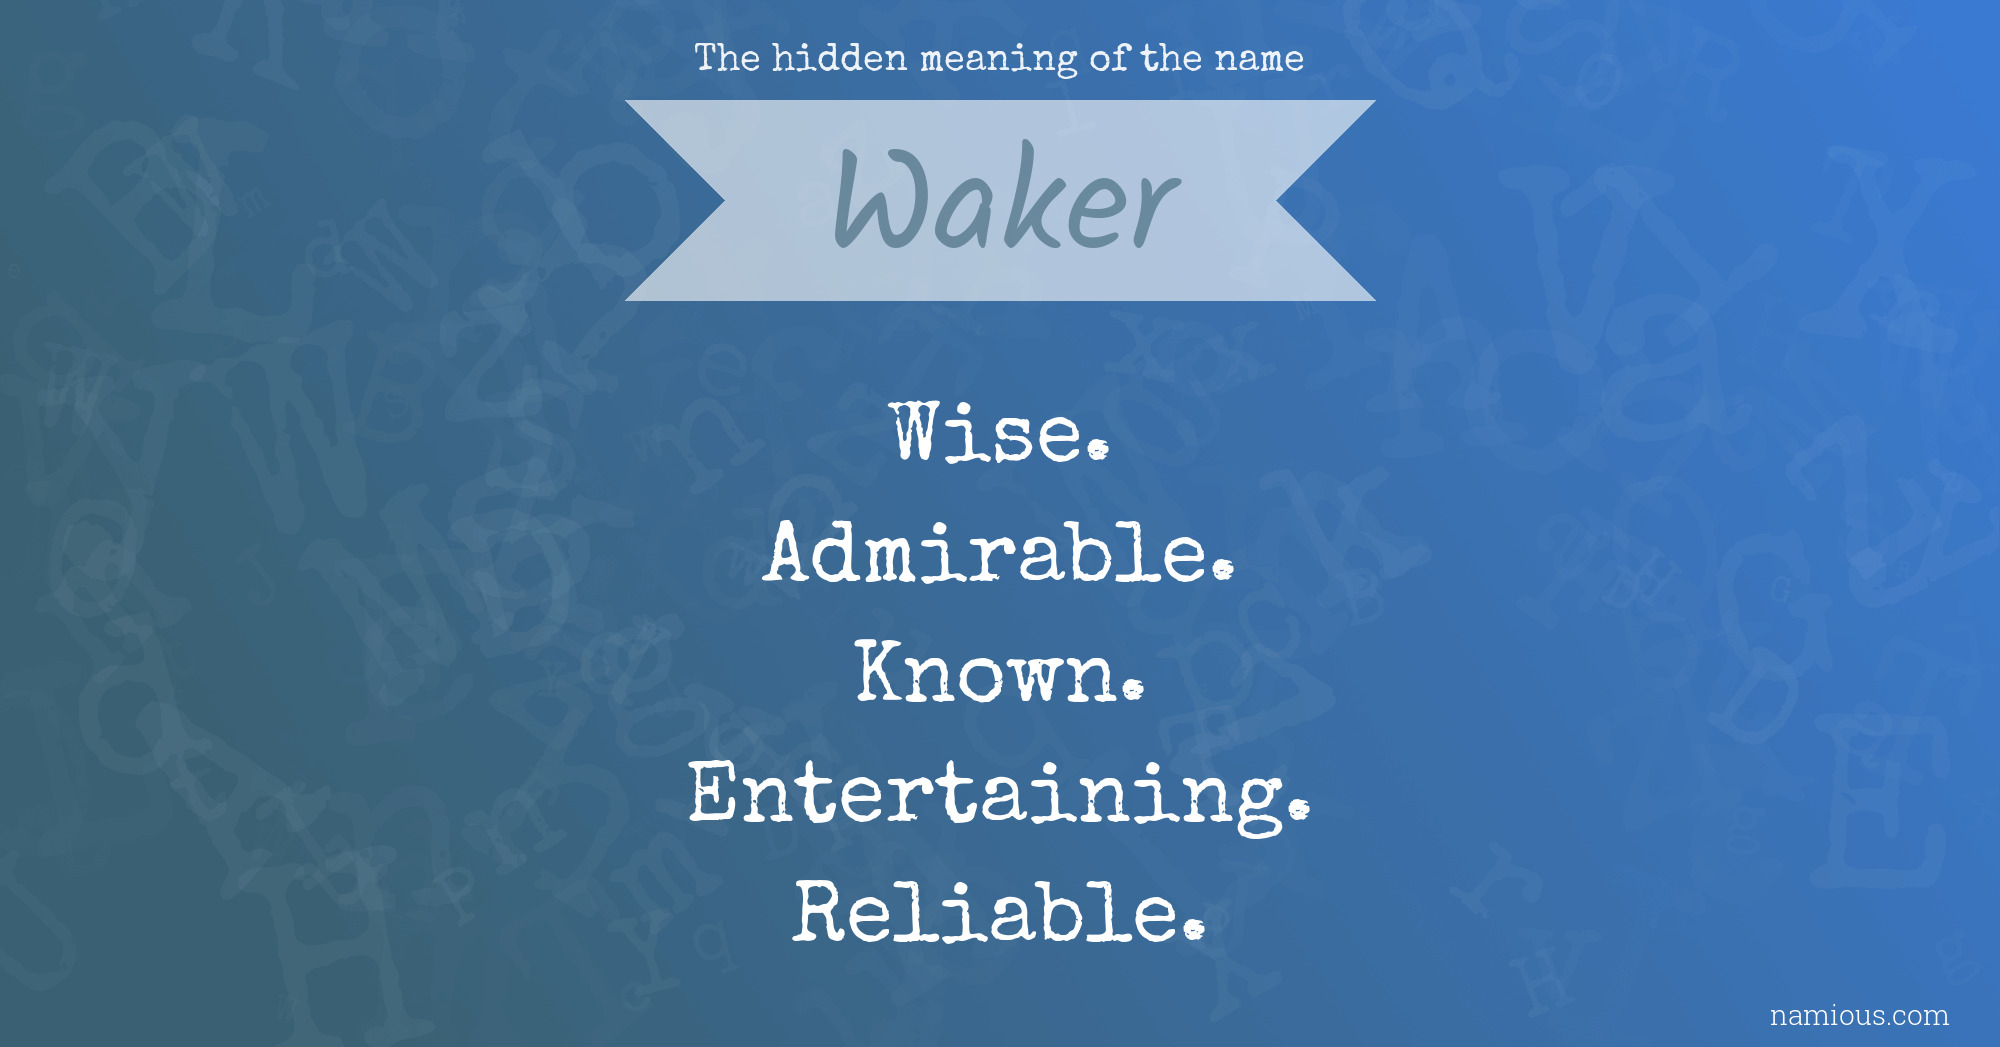 The hidden meaning of the name Waker